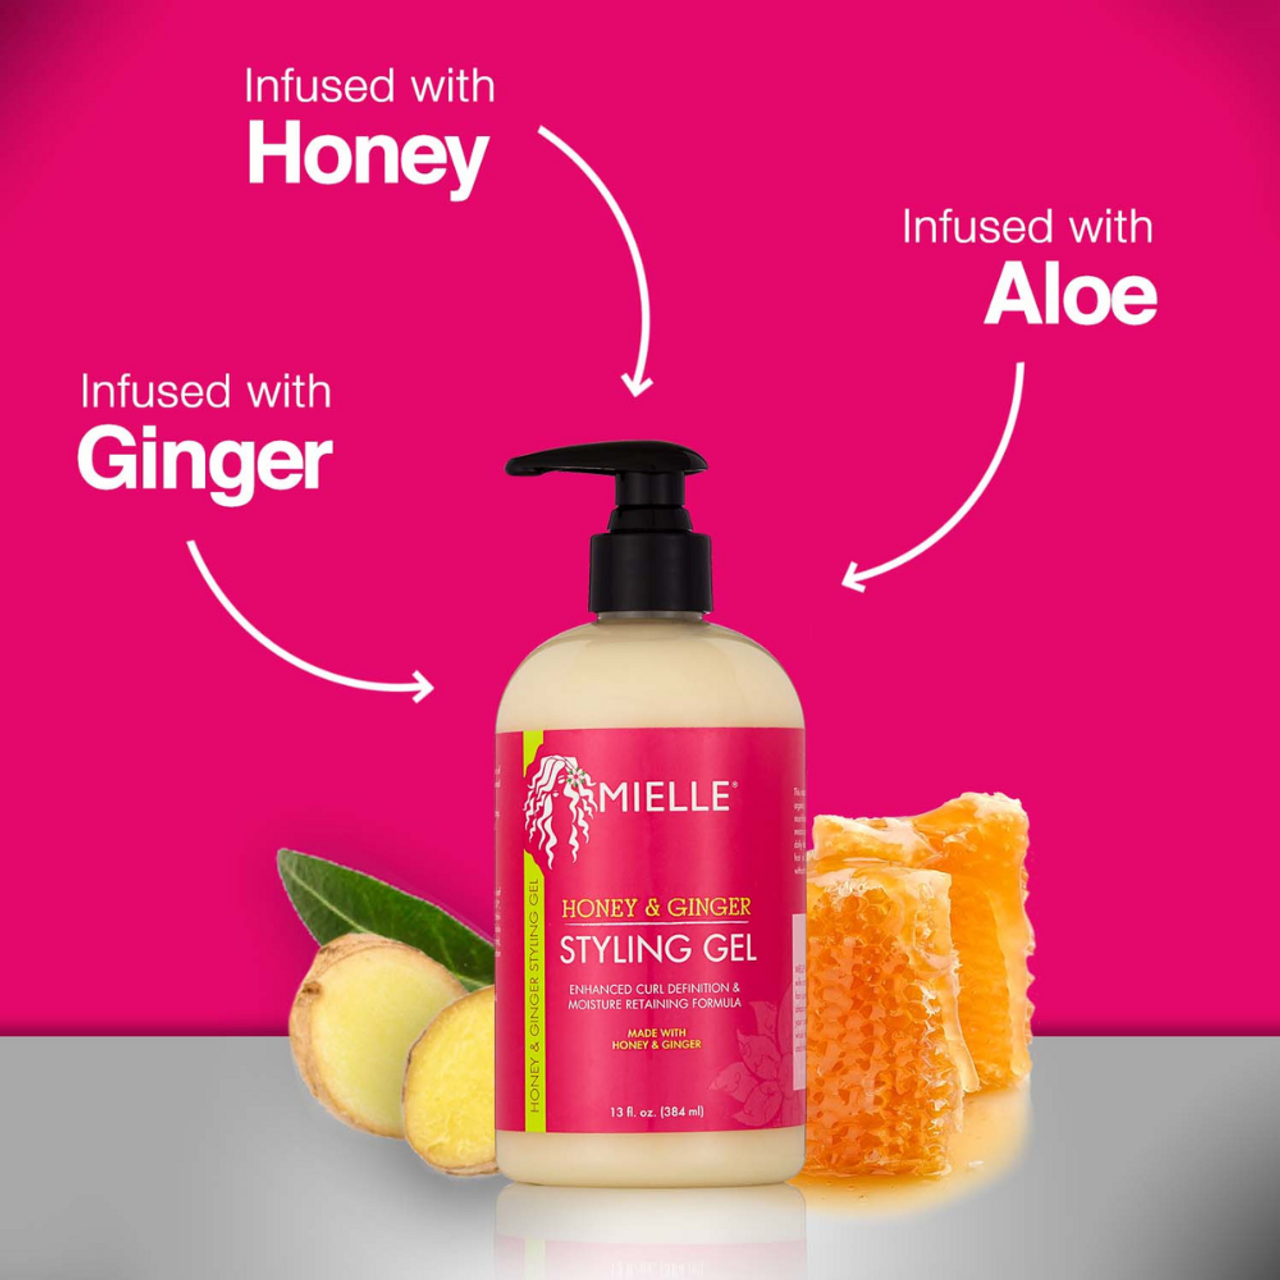 Mielle Organics Honey & Ginger Styling Gel (13 oz.) - NaturallyCurly